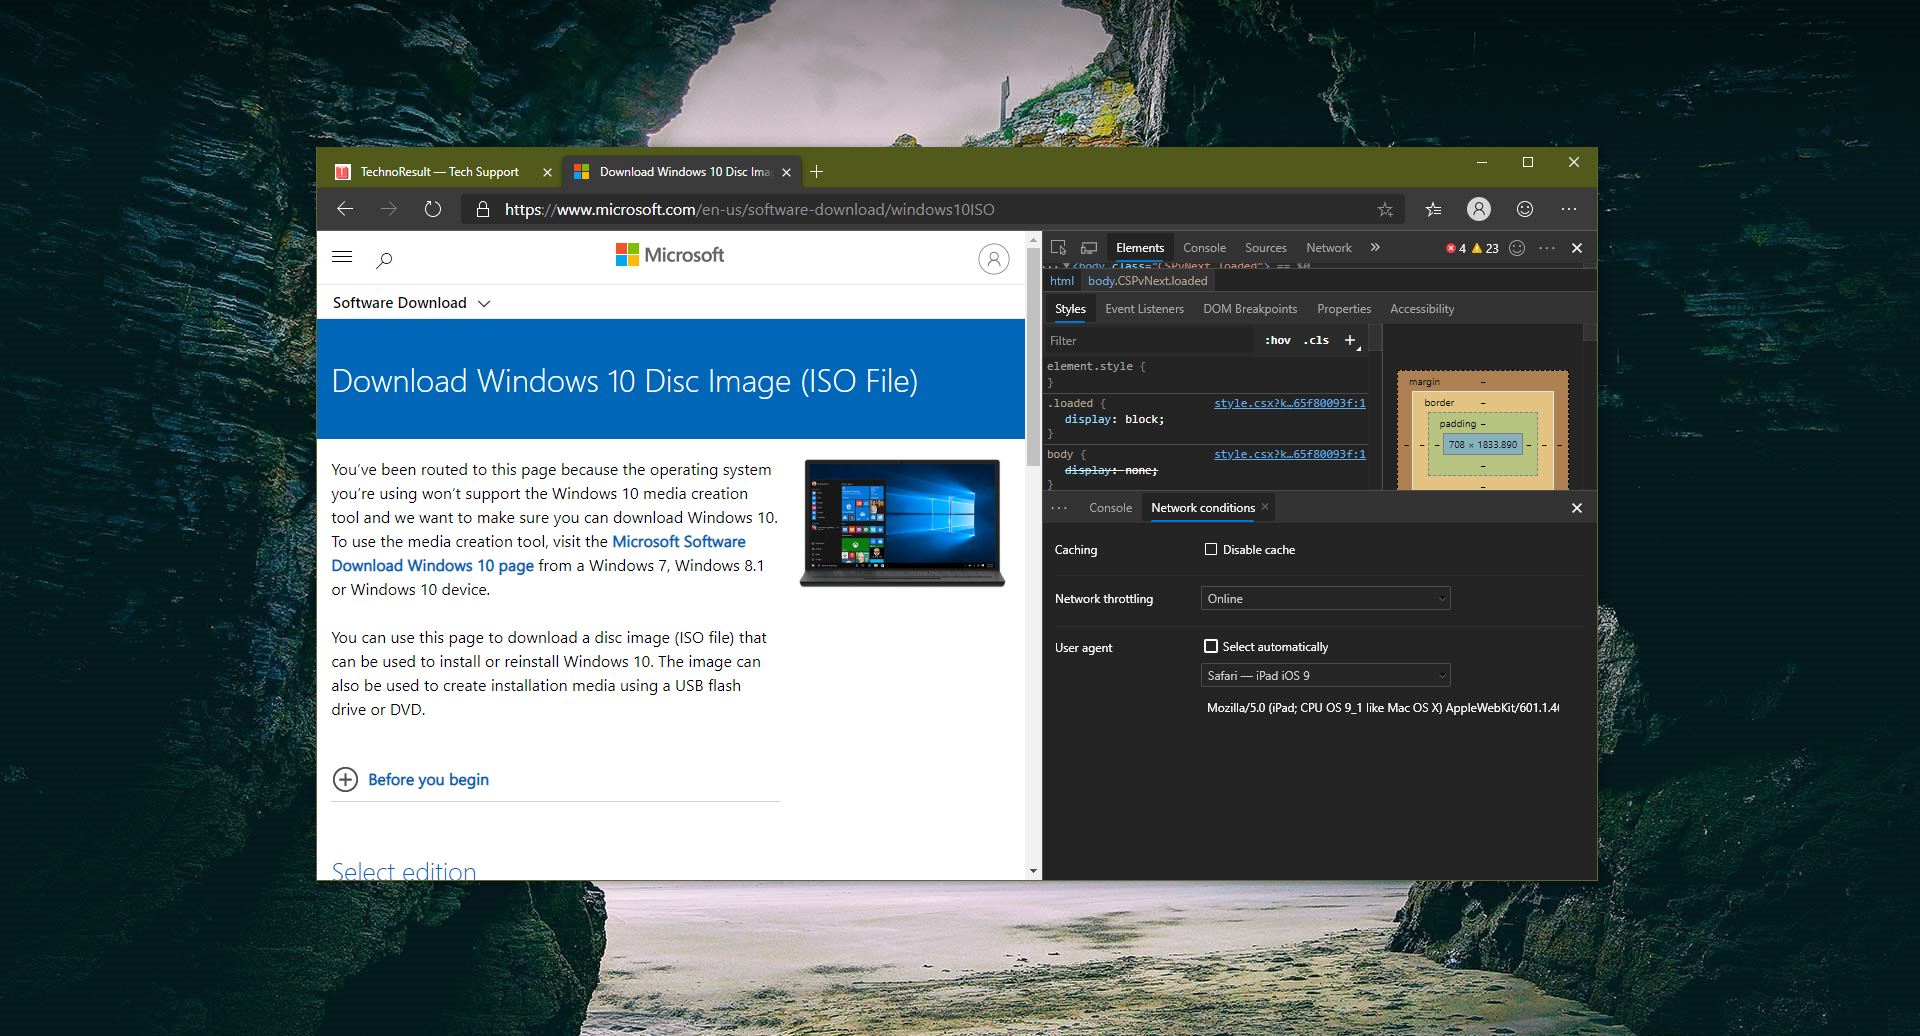 How to Download Windows 10 1909 ISO officially from Microsoft?